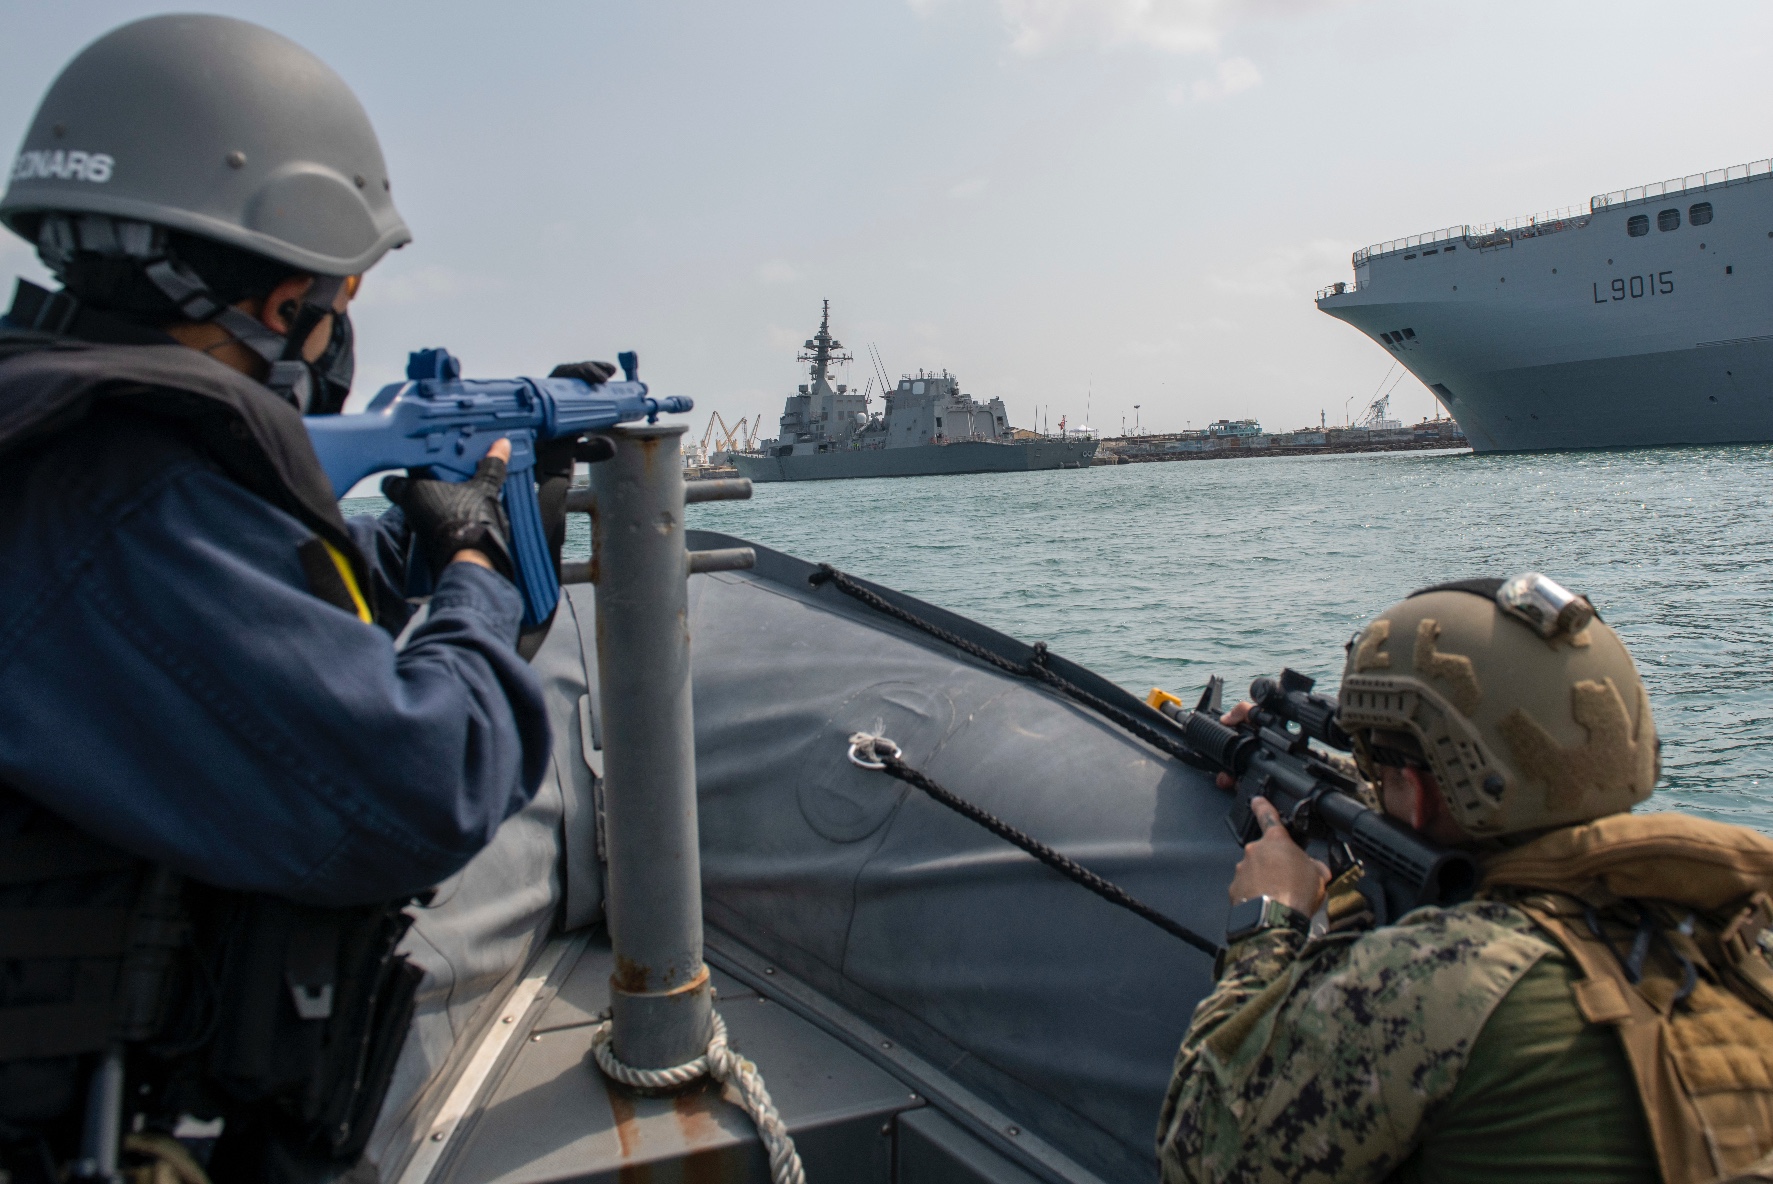 Members of the U.S. Navy’s Maritime Expeditionary Security Squadron 8, the Djiboutian Navy, and the Japan Maritime Self-Defense Force participated in a trilateral training engagement aboard the Japanese destroyer JS Suzutsuki